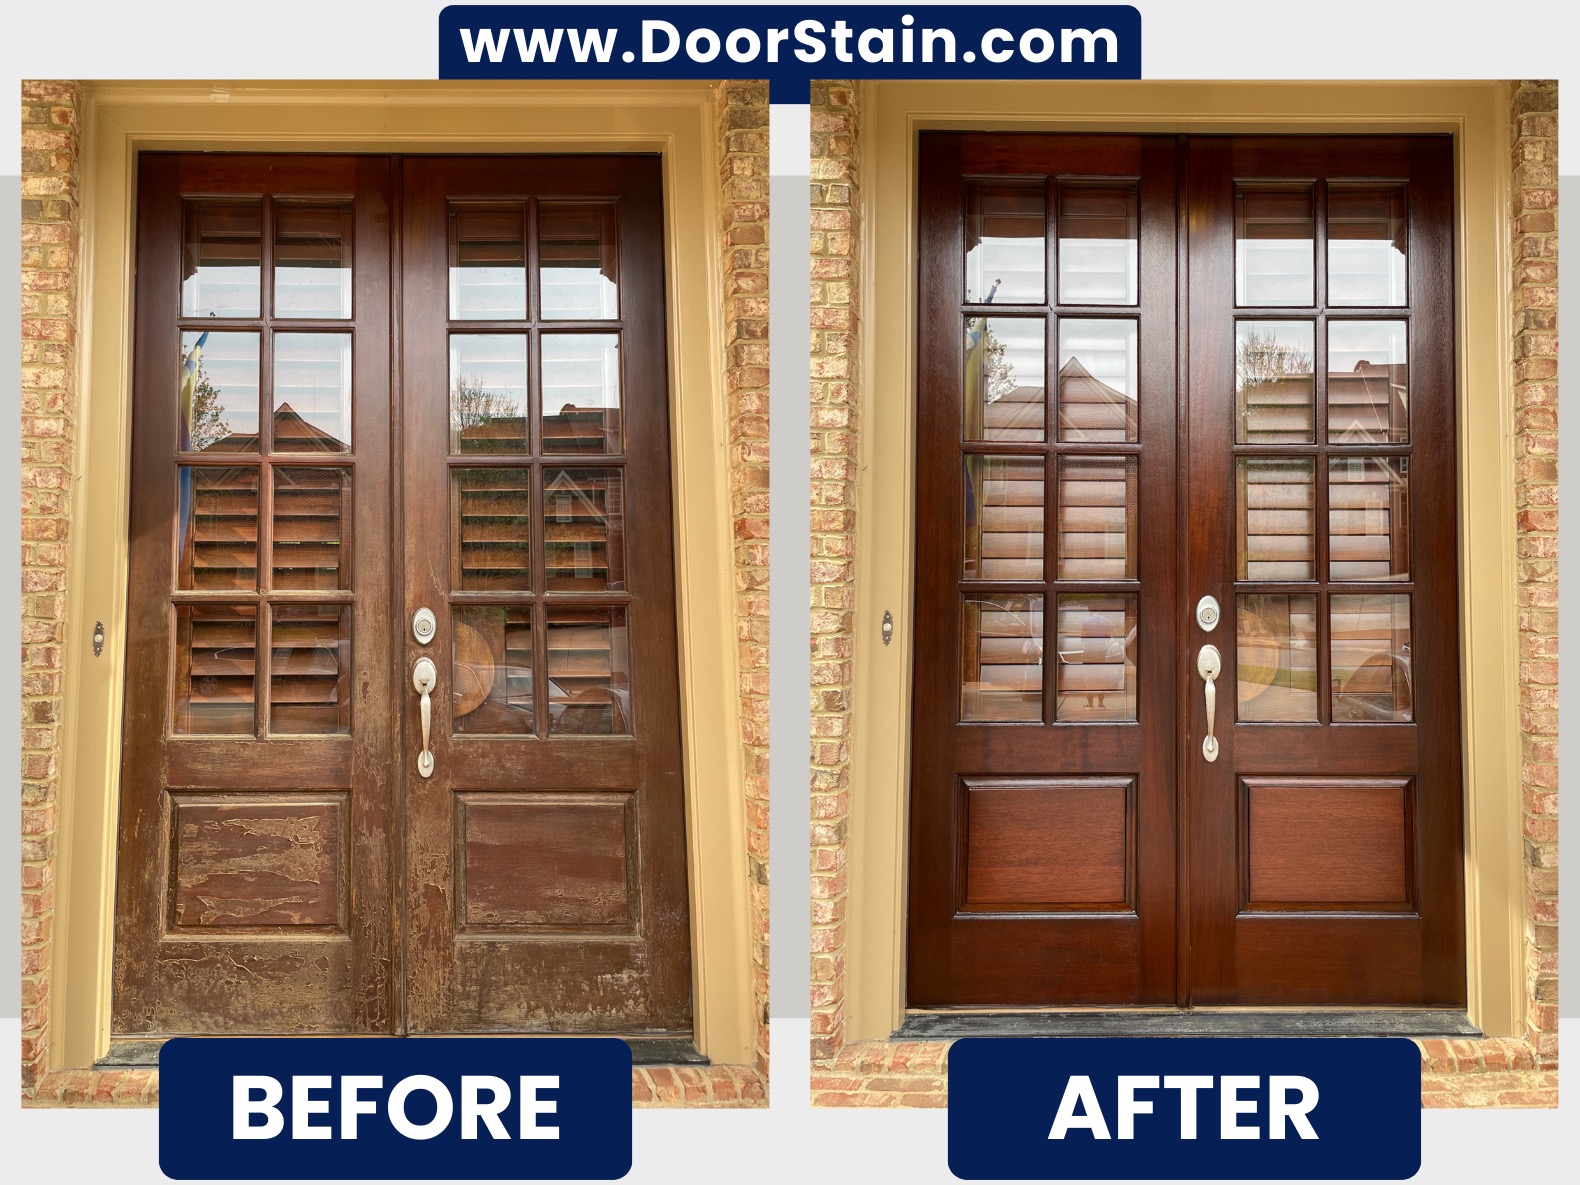 Step-by-Step Guide: How to Refinish a Door